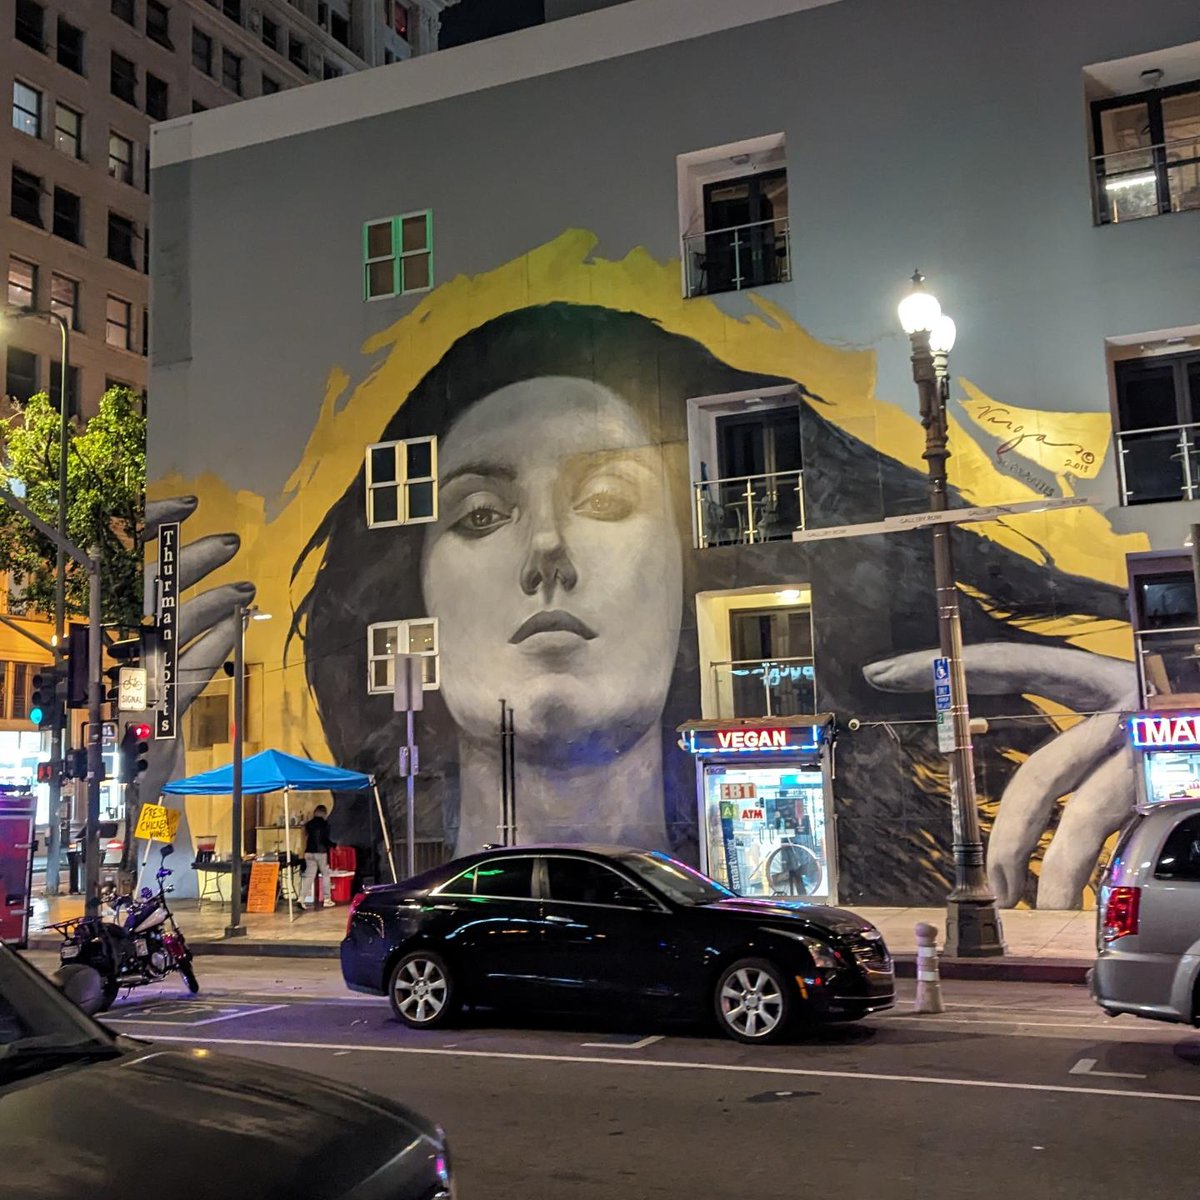 Grateful for the space we were able to share yesterday evening. (Art) Walking a line between work and recreation, choosing good food and experiencing creative culture. 🥰🍺🎨 #Radiology #Art #RadArt #Wellbeing #Artwalk #DTLA #dtlaartsdistrict #nightlife #culture #community